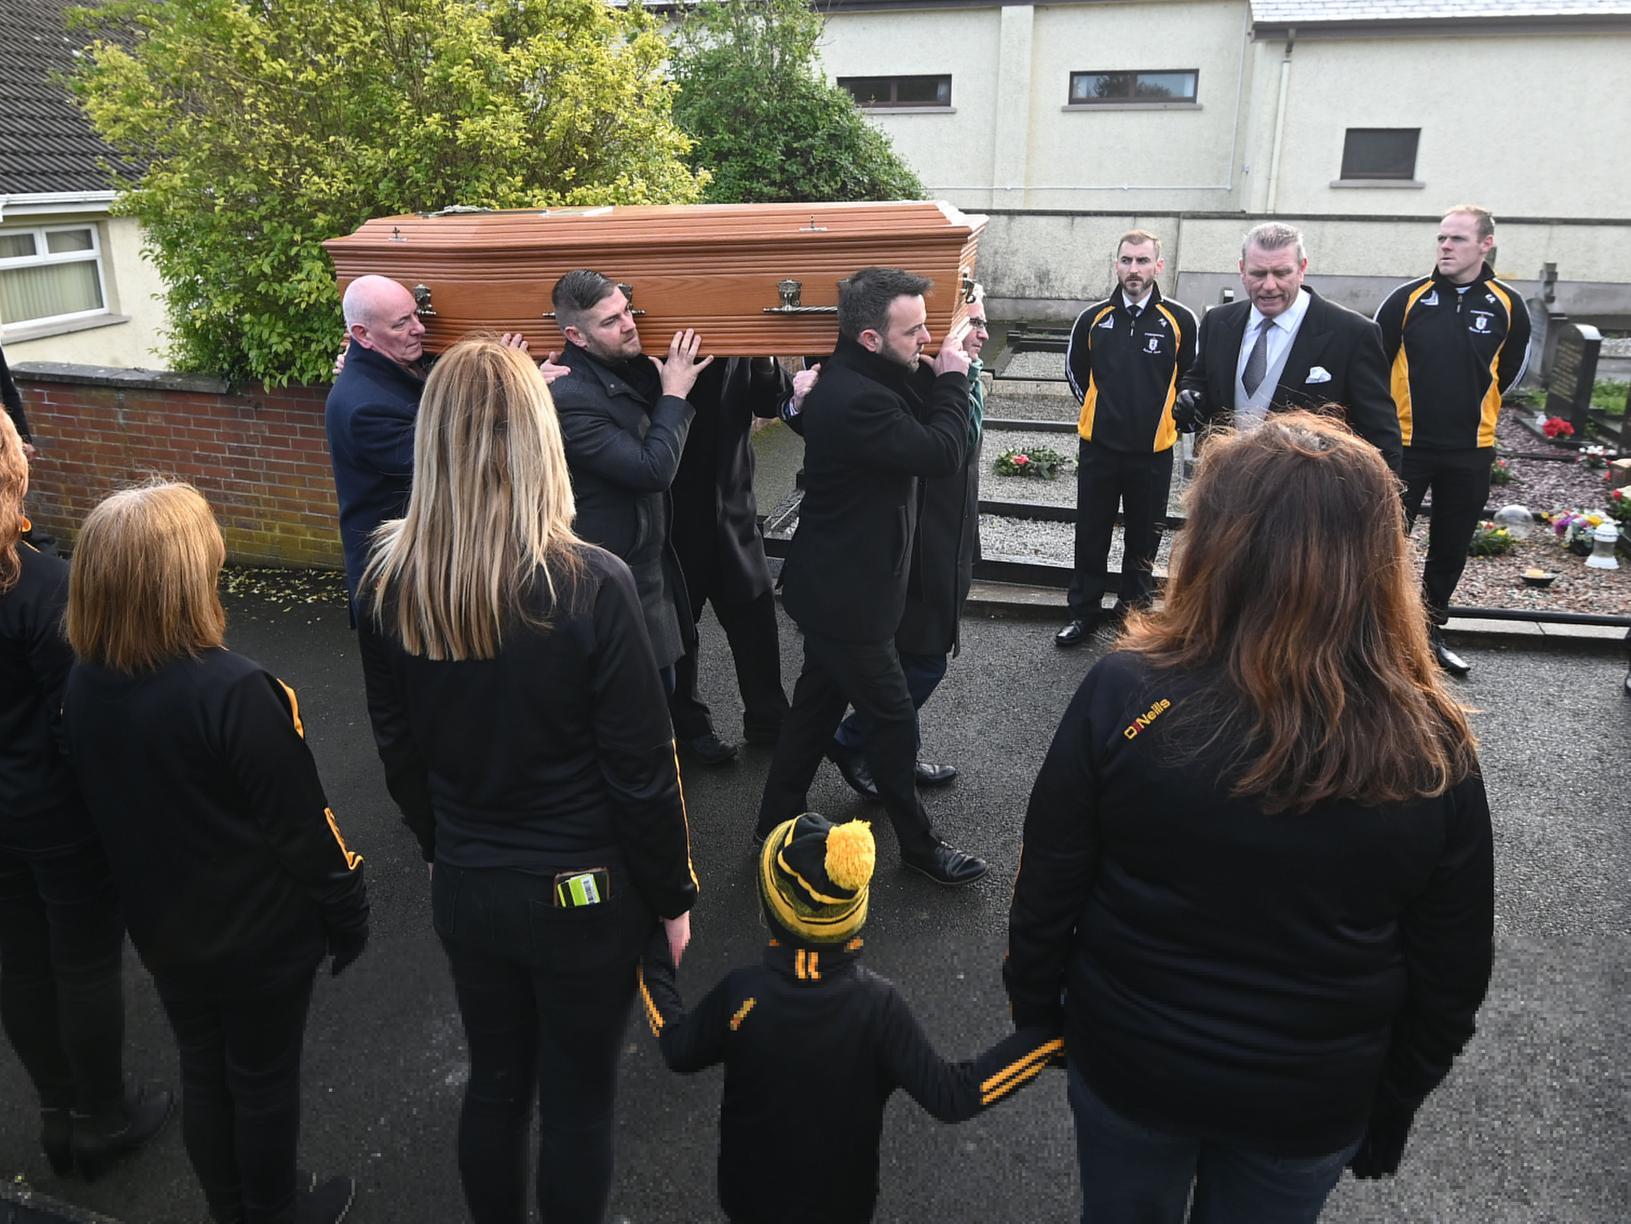 As a mark of respect for Mr. Mallon a local GAA club provided a guard of honour as the former deputy First Minister's coffin was carried into the chapel.